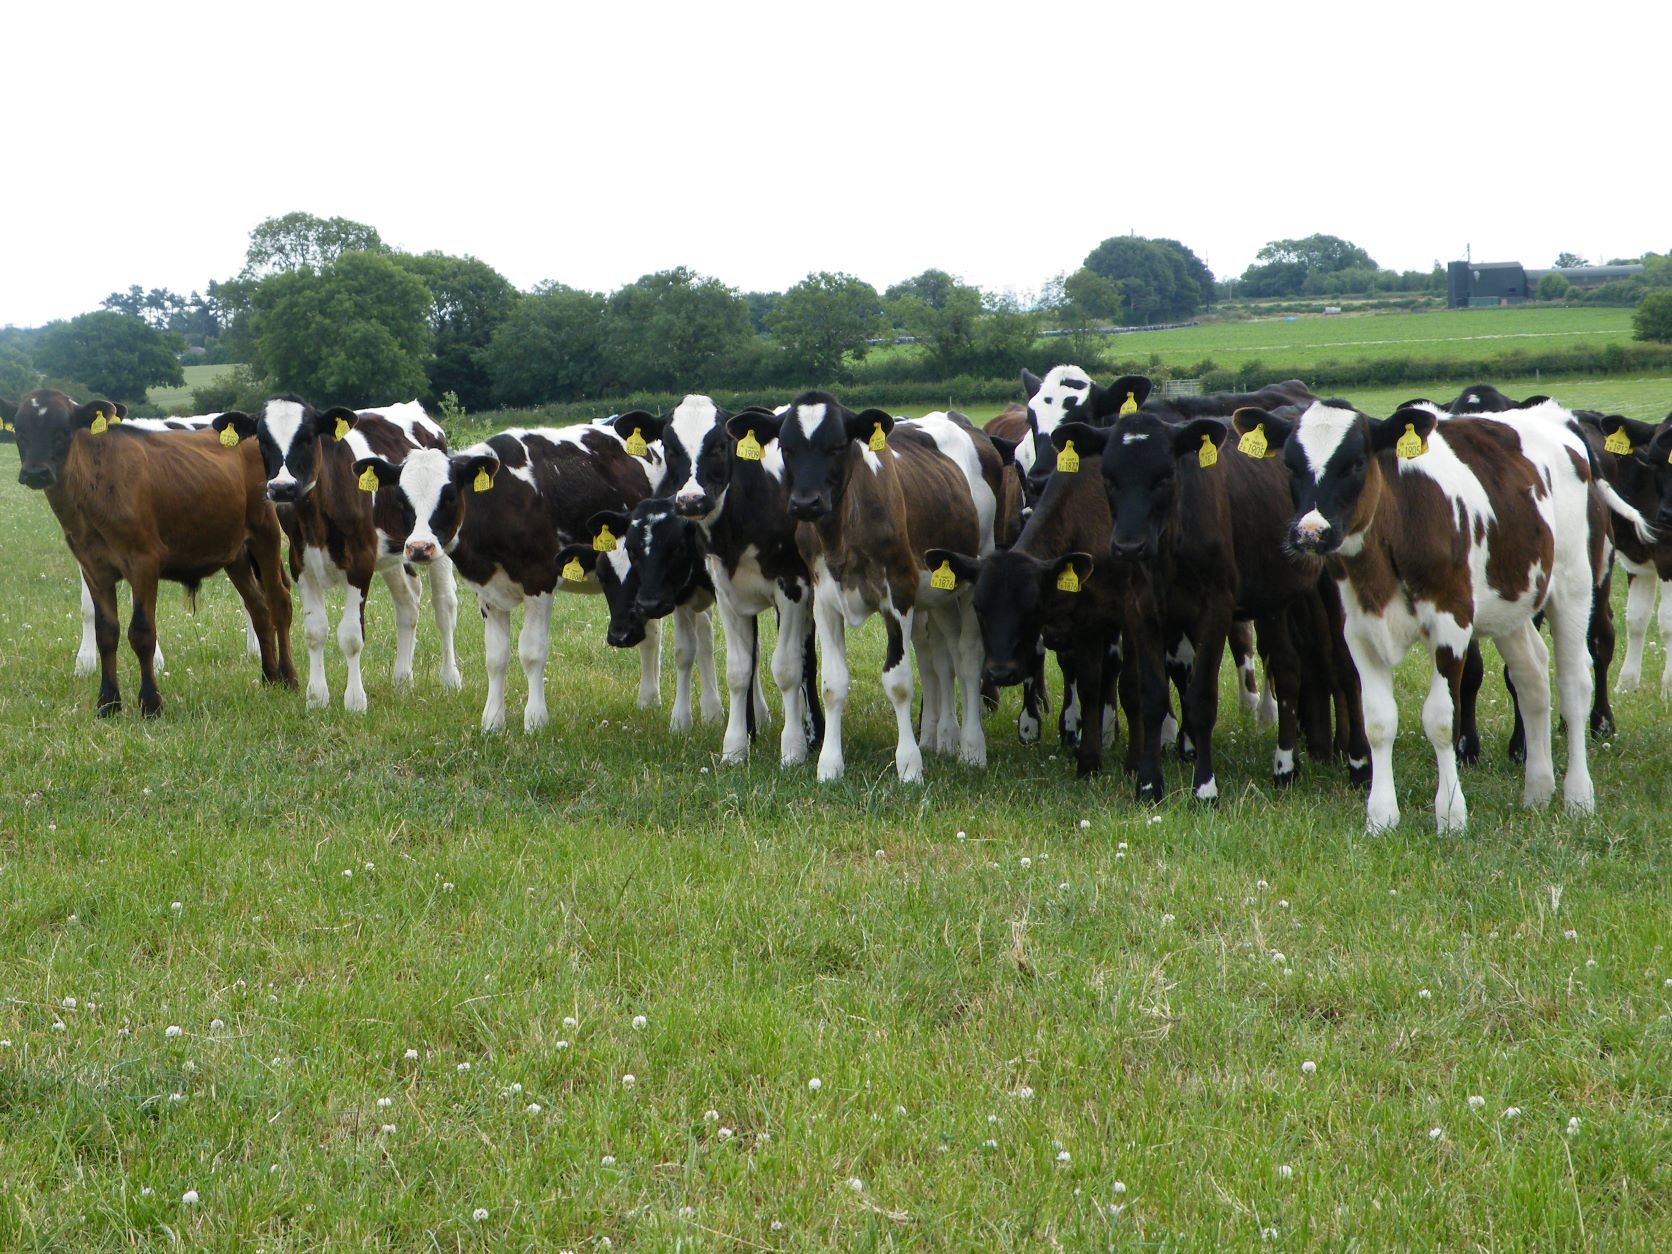 Group of heifers at grass